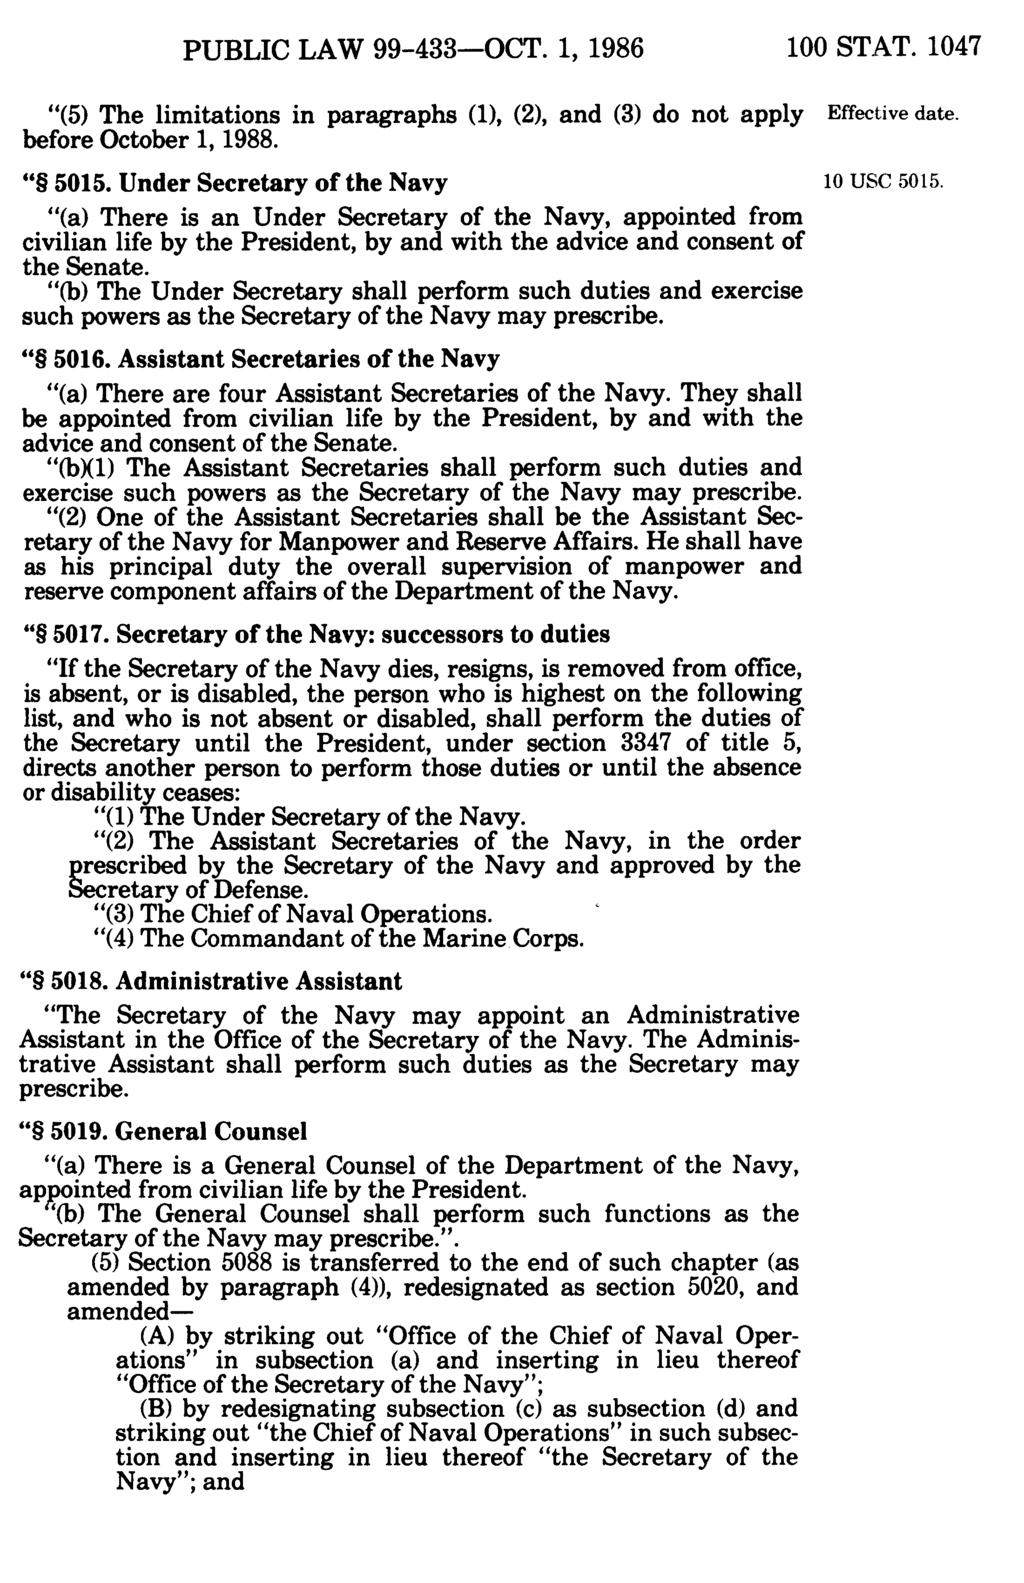 PUBLIC LAW 99-433-OCT. 1, 1986 100 STAT. 1047 (5) The limitations in paragraphs (l), (2), and (3) do not apply Effective date. before October 1, 1988. 5015. Under Secretary of the Navy 10 USC 5015.